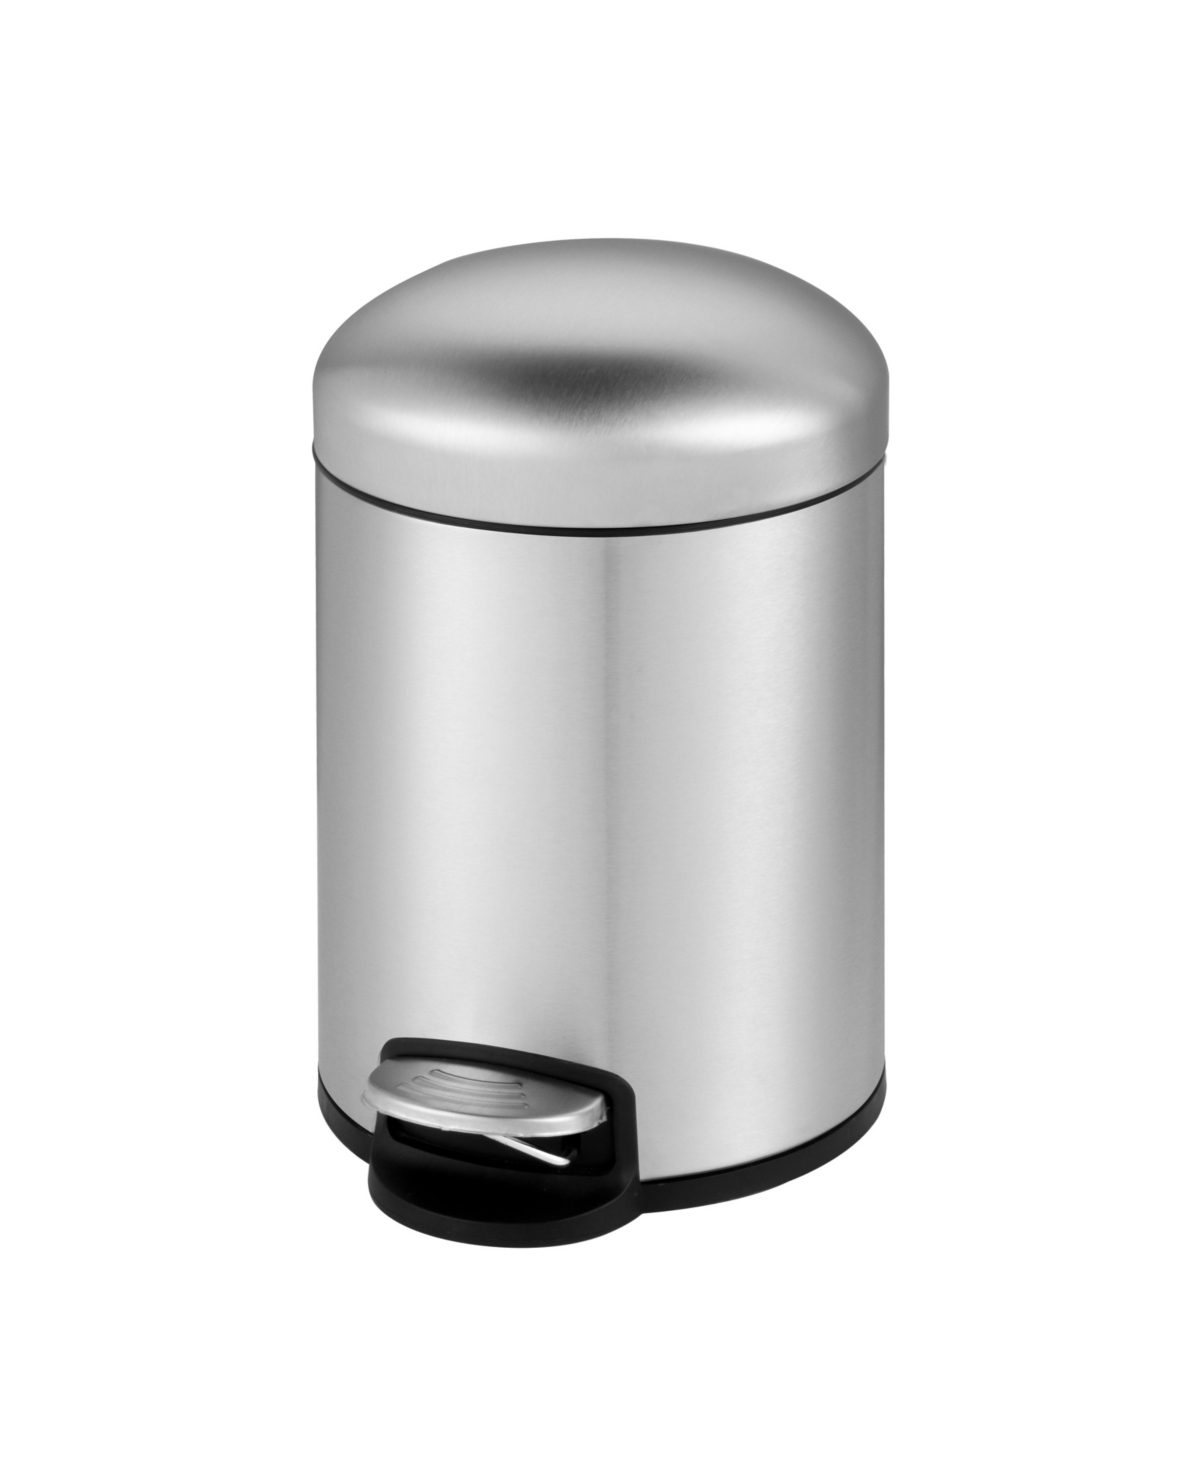 1.32 Gal./5 Liter Stainless Steel Round Step-on Trash Can for Bathroom and Office - Silver